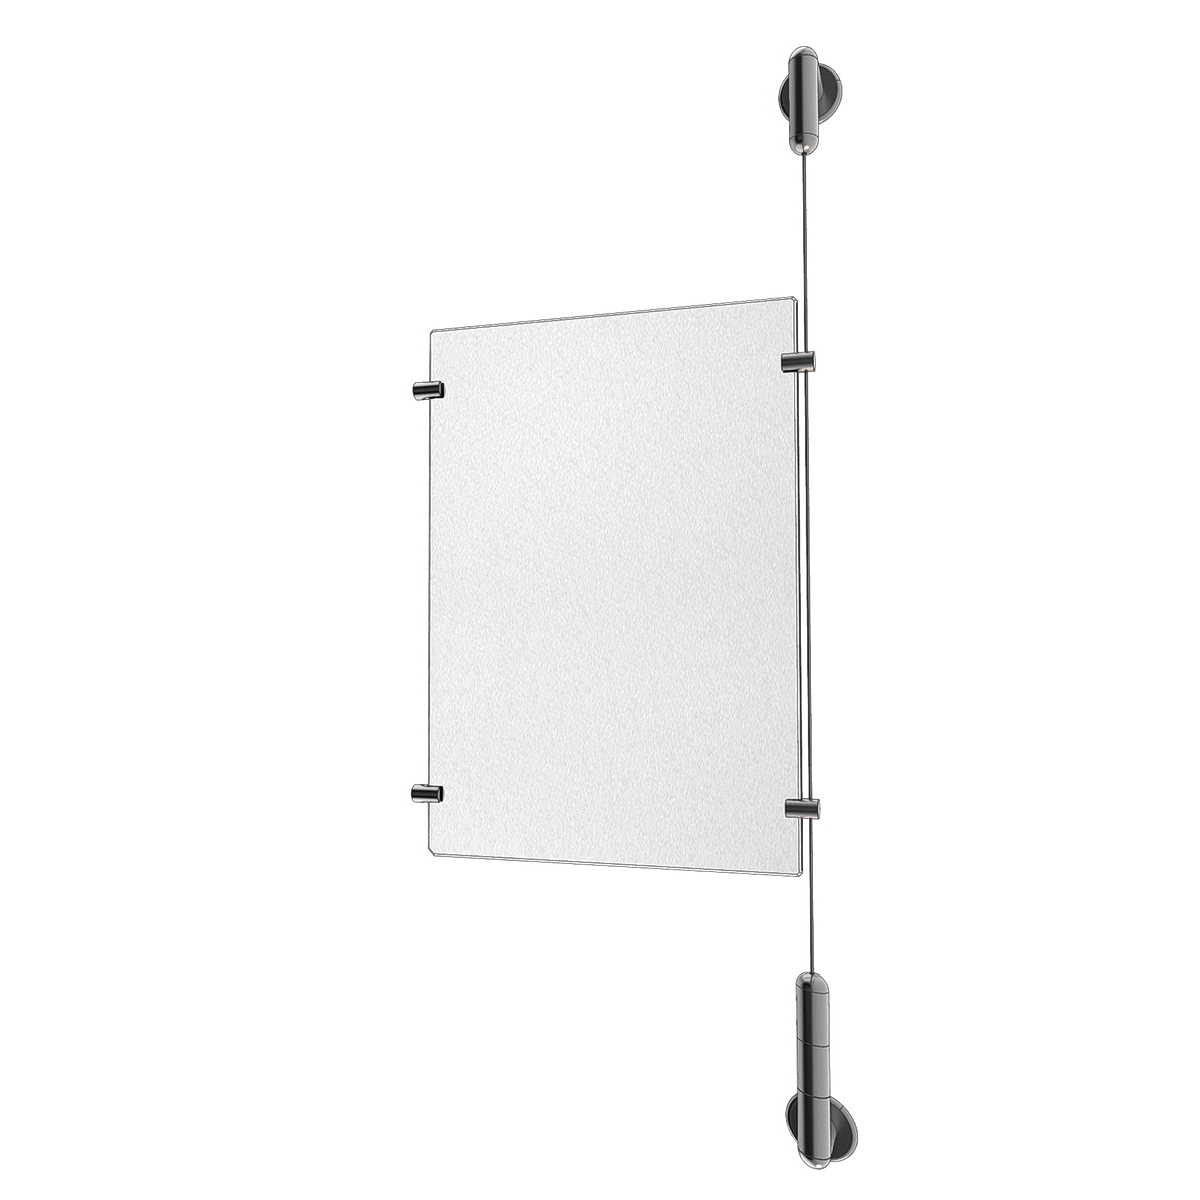 Clear Acrylic Sign Holder Extension Kit for Media 1 x 8.5'' x 11''